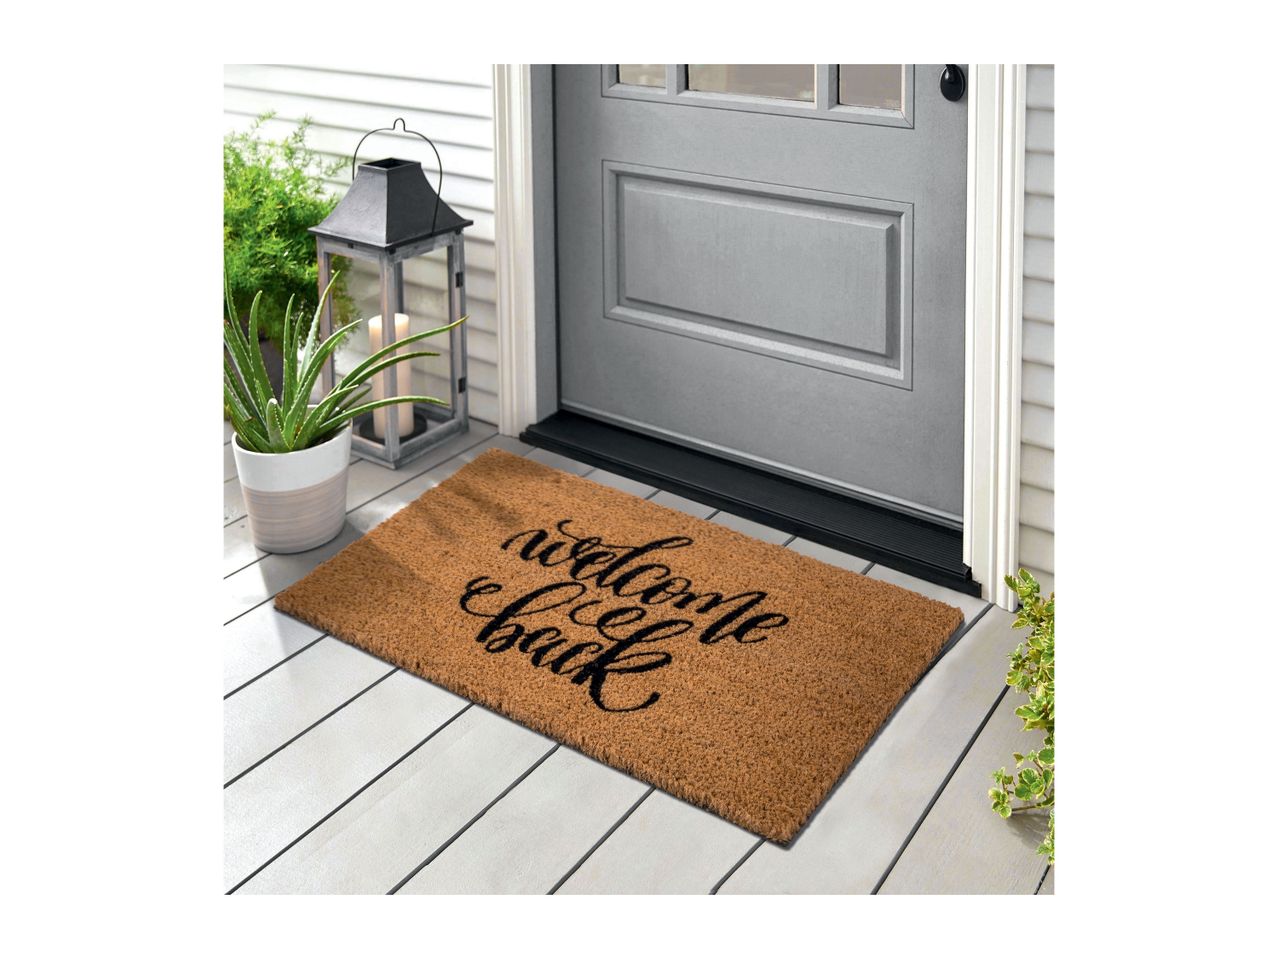 Go to full screen view: Livarno Home Coir Doormat Assorted Designs - Image 4